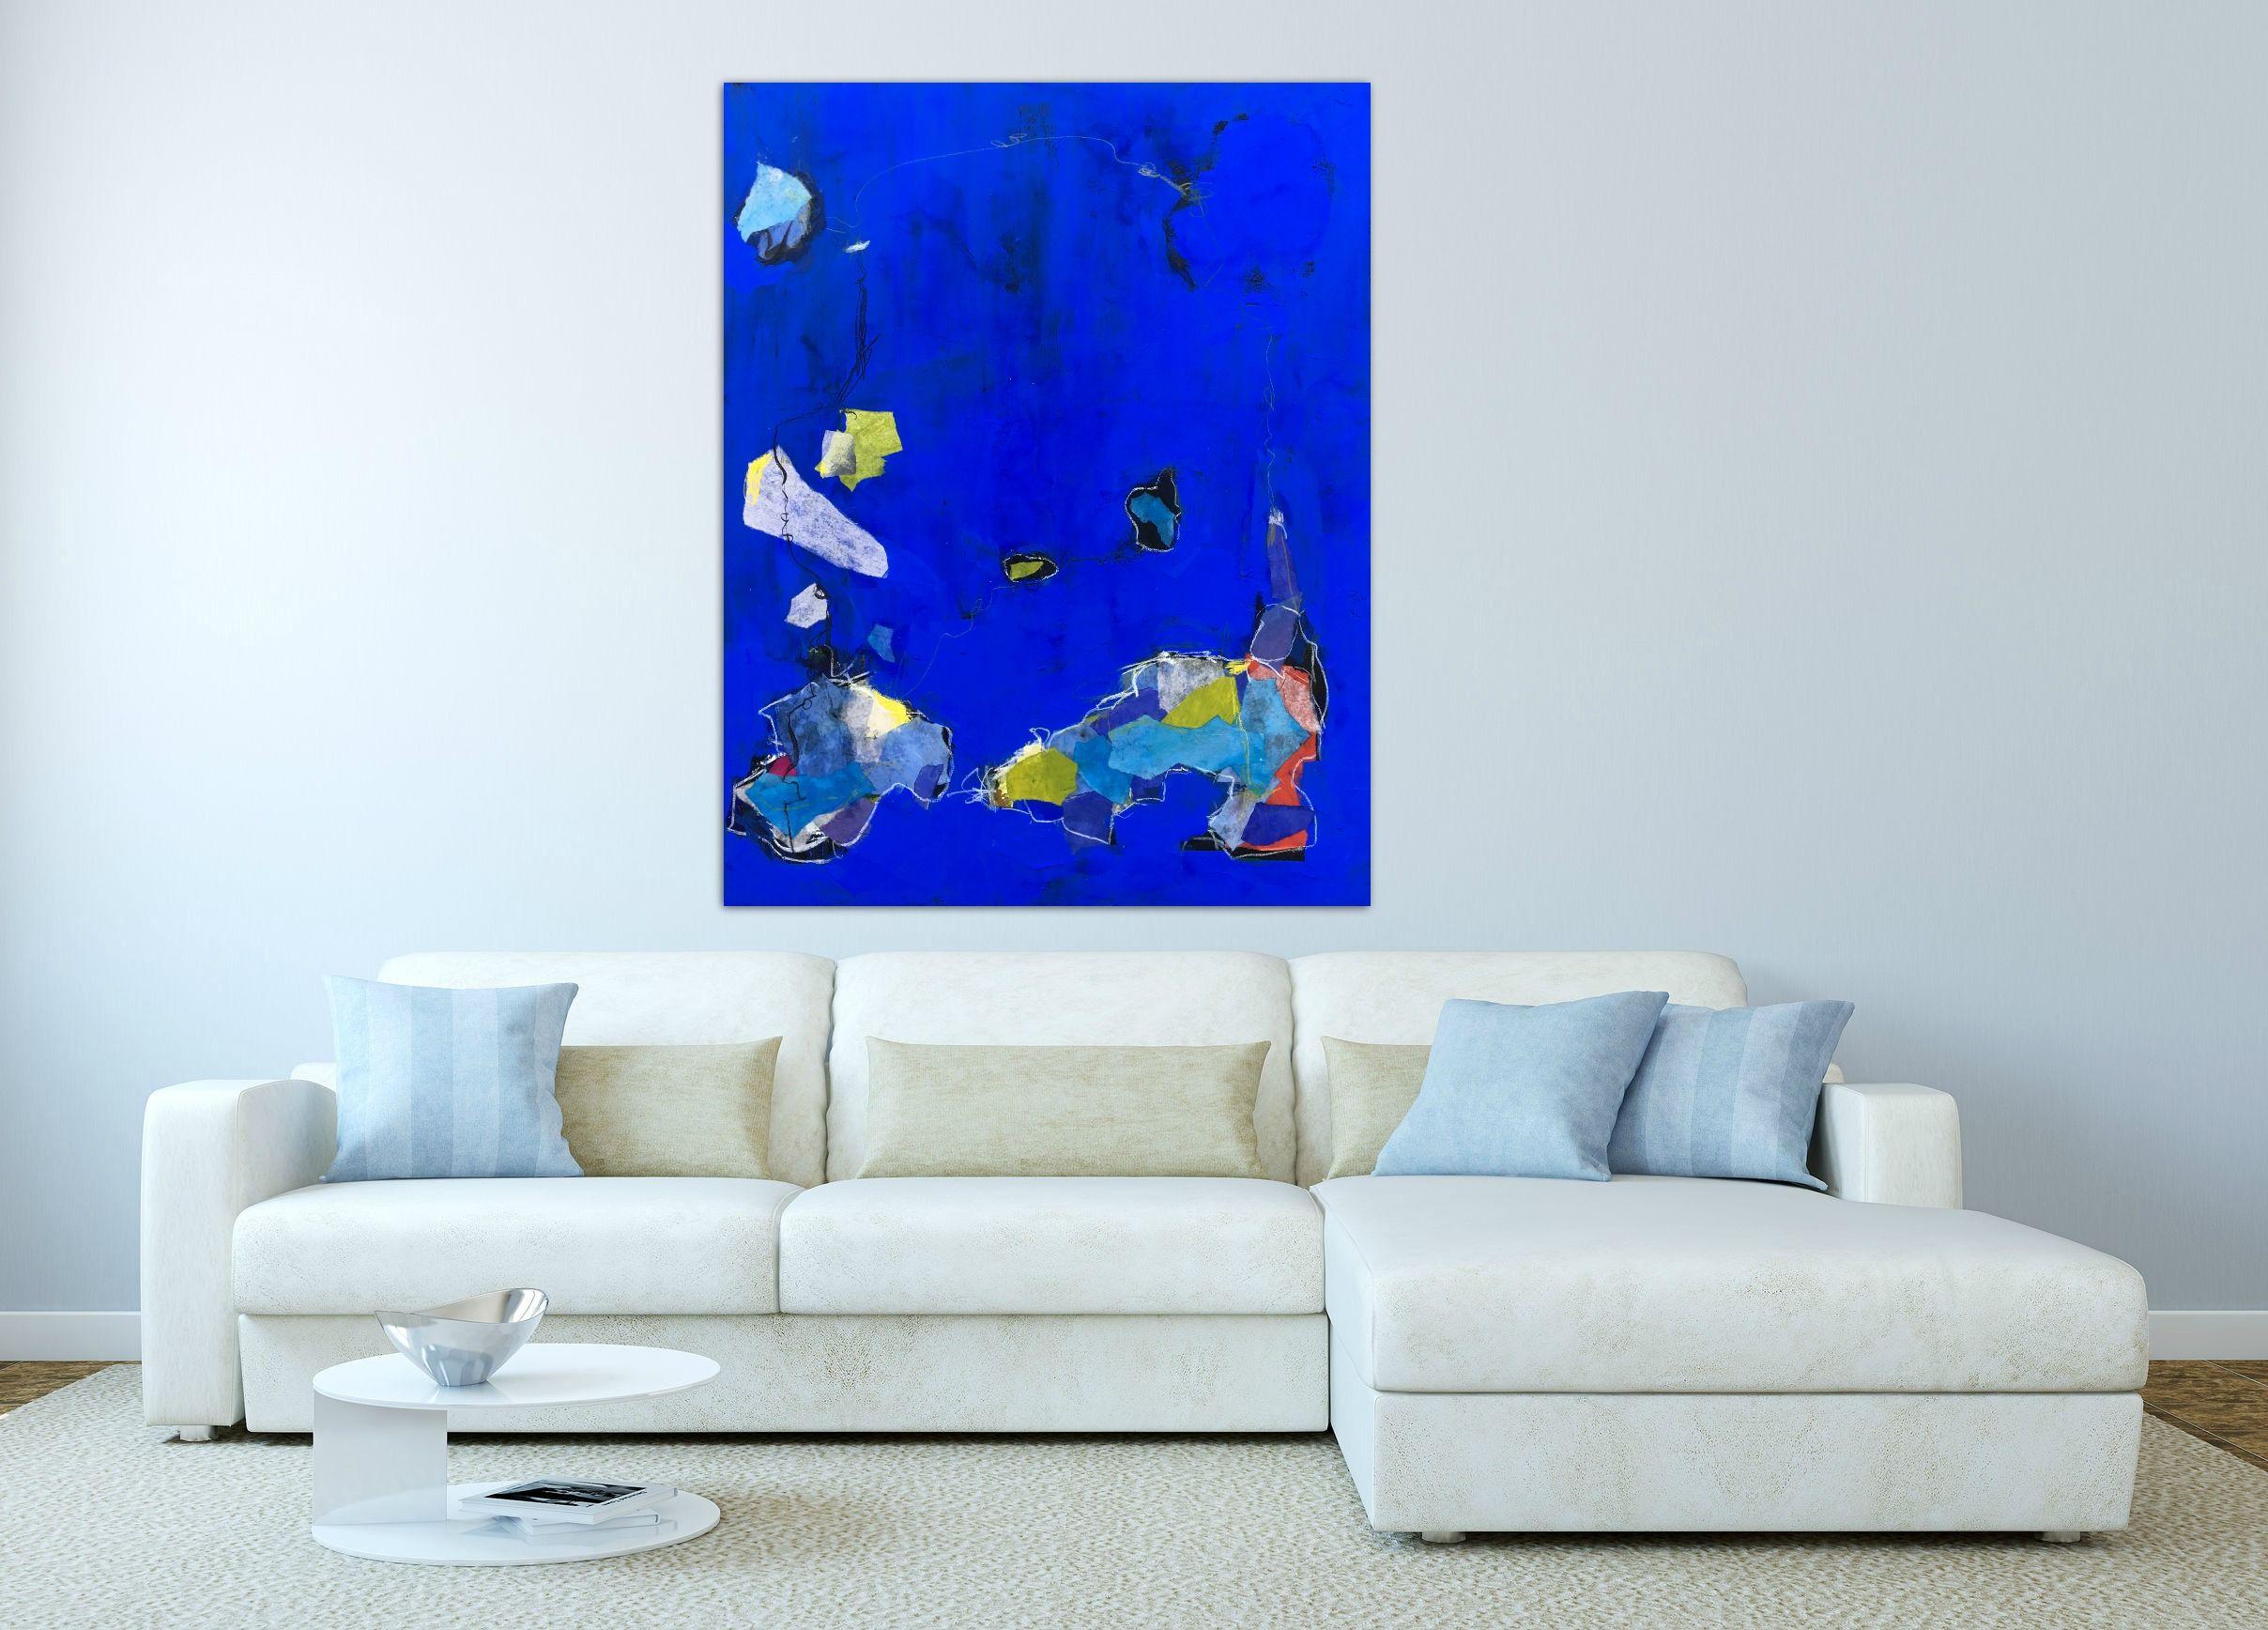 Cycle of Life, Painting, Acrylic on Canvas - Blue Abstract Painting by Angela Dierks